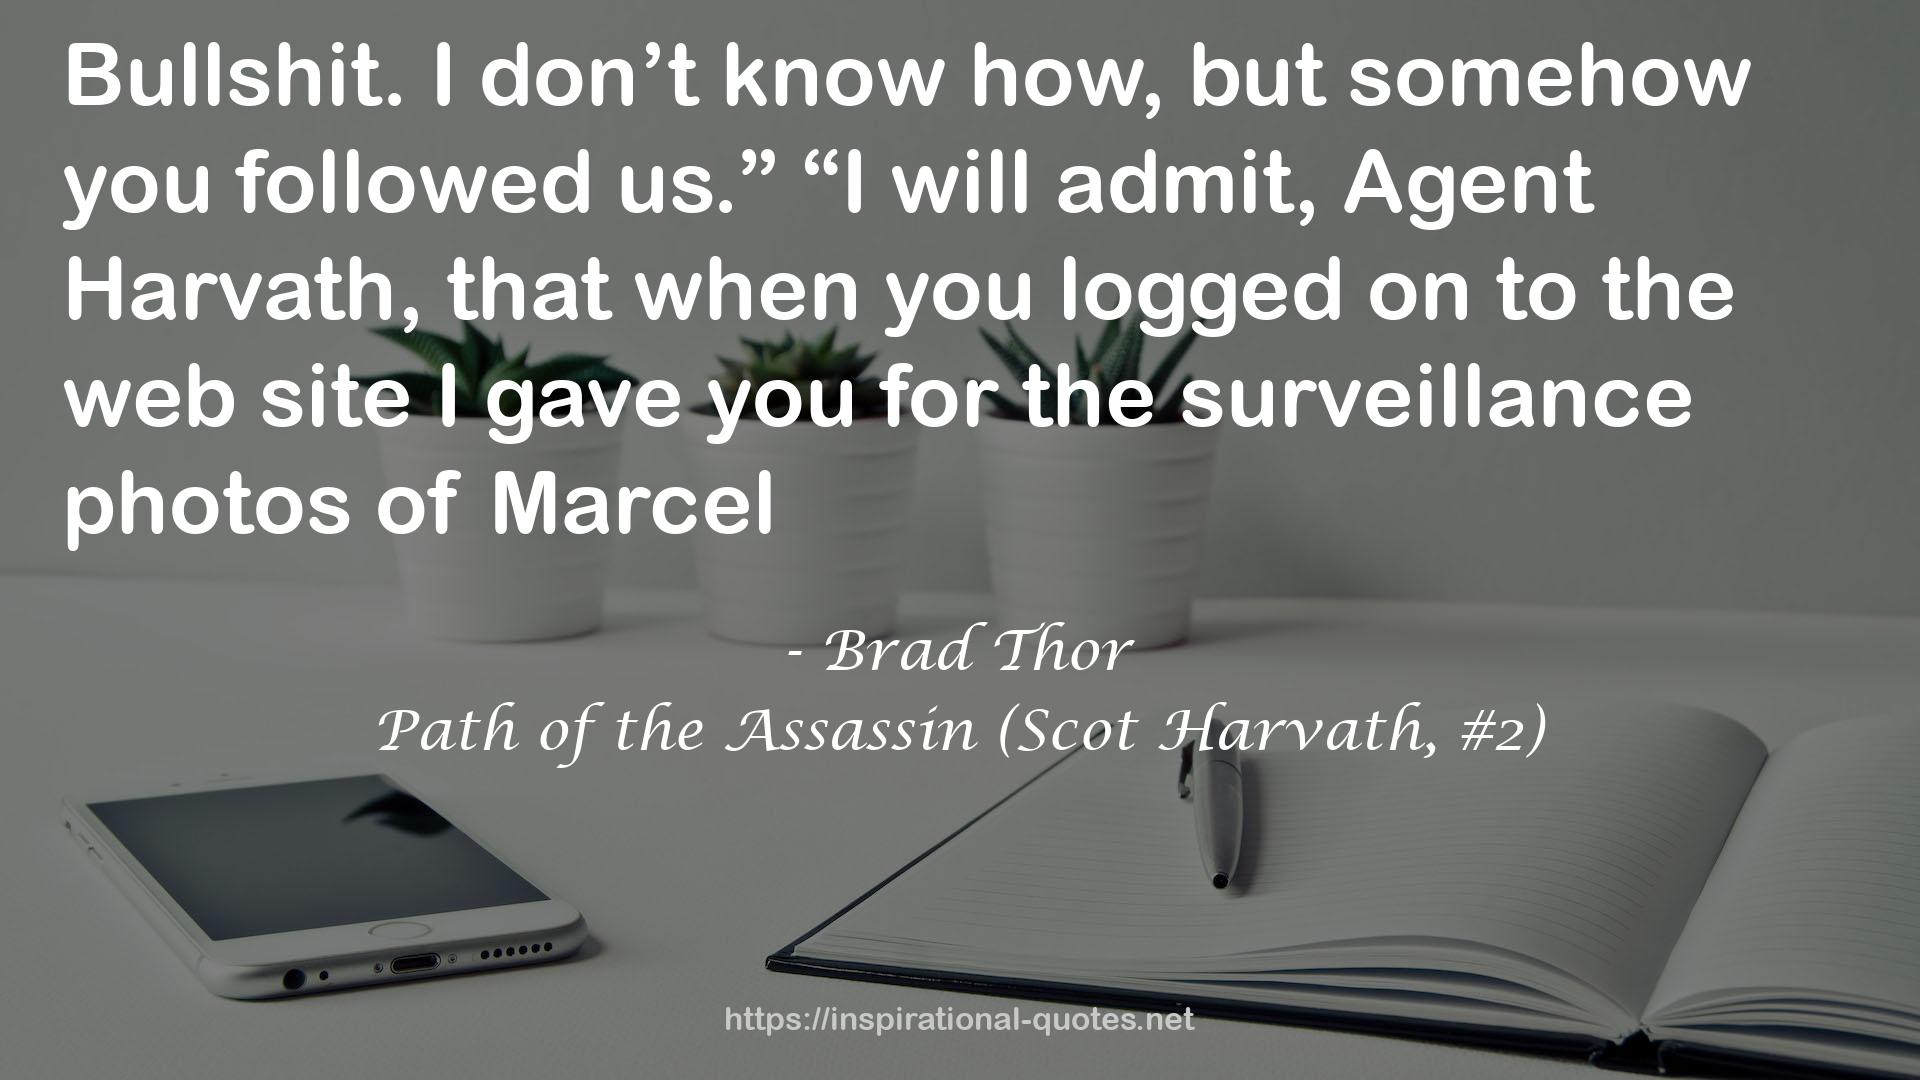 Path of the Assassin (Scot Harvath, #2) QUOTES